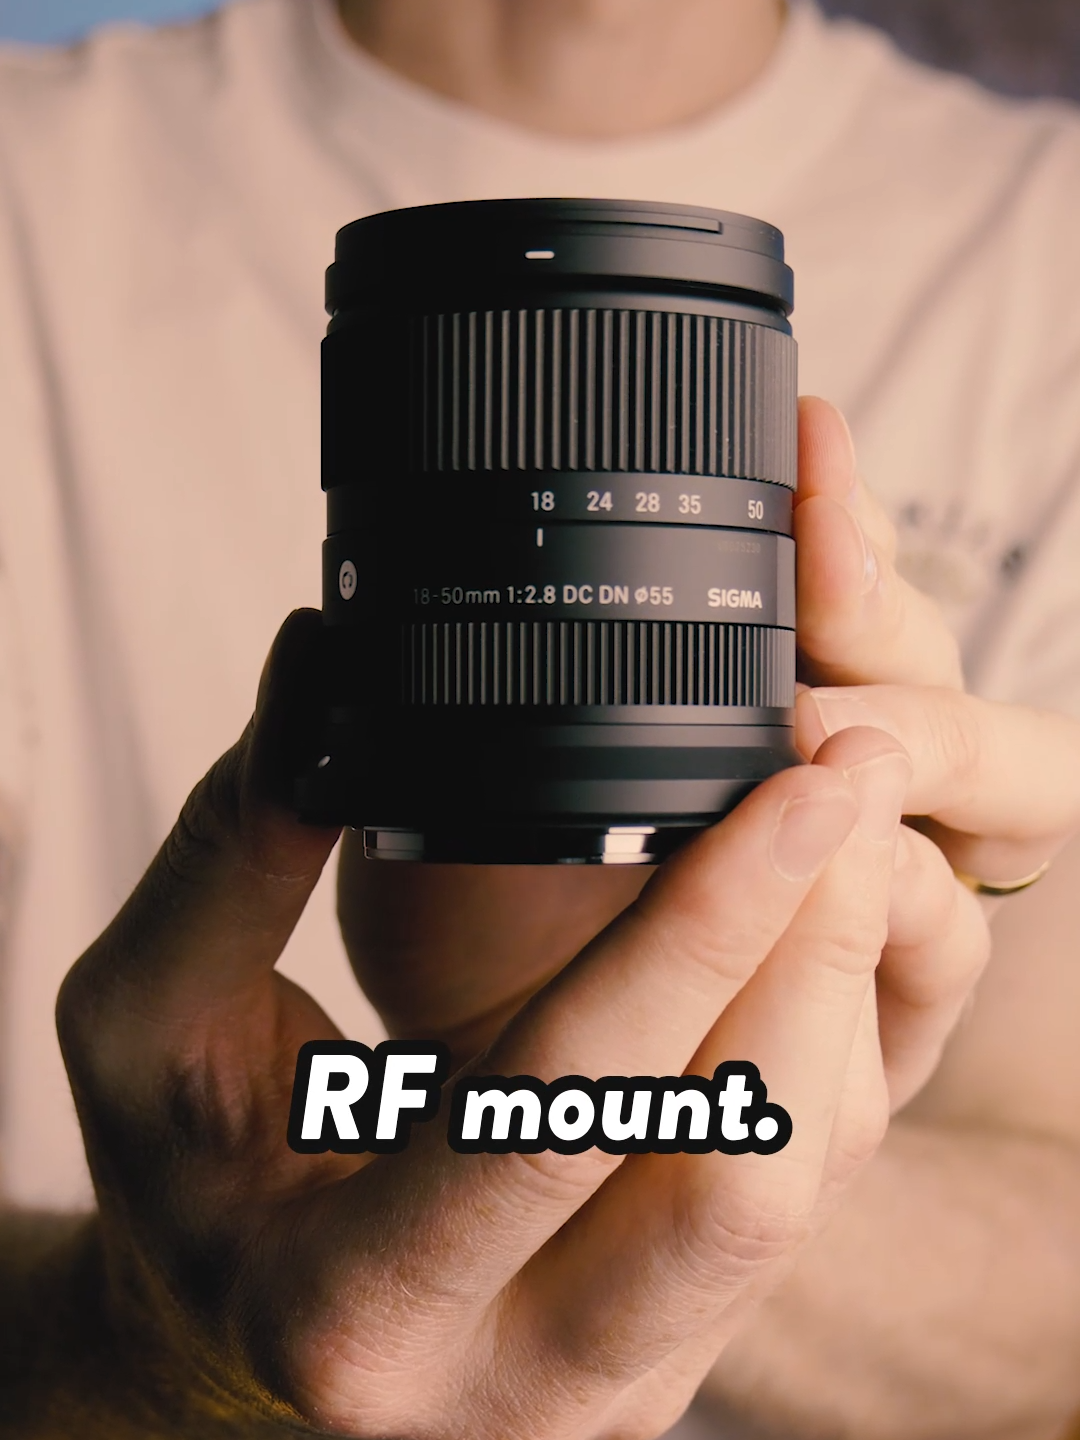 Sigma's FIRST lens release for Canon RF mount is finally here! This is the Sigma 18-50mm f2.8 DC DN #photography #videography #canon #canoncamera #canoncameras #canonrf #canonrfmount #sigma #sigma18-50 #zoomlens #sigmazoom #mirrorless #mirrorlesscamera #mirrorlesscanon